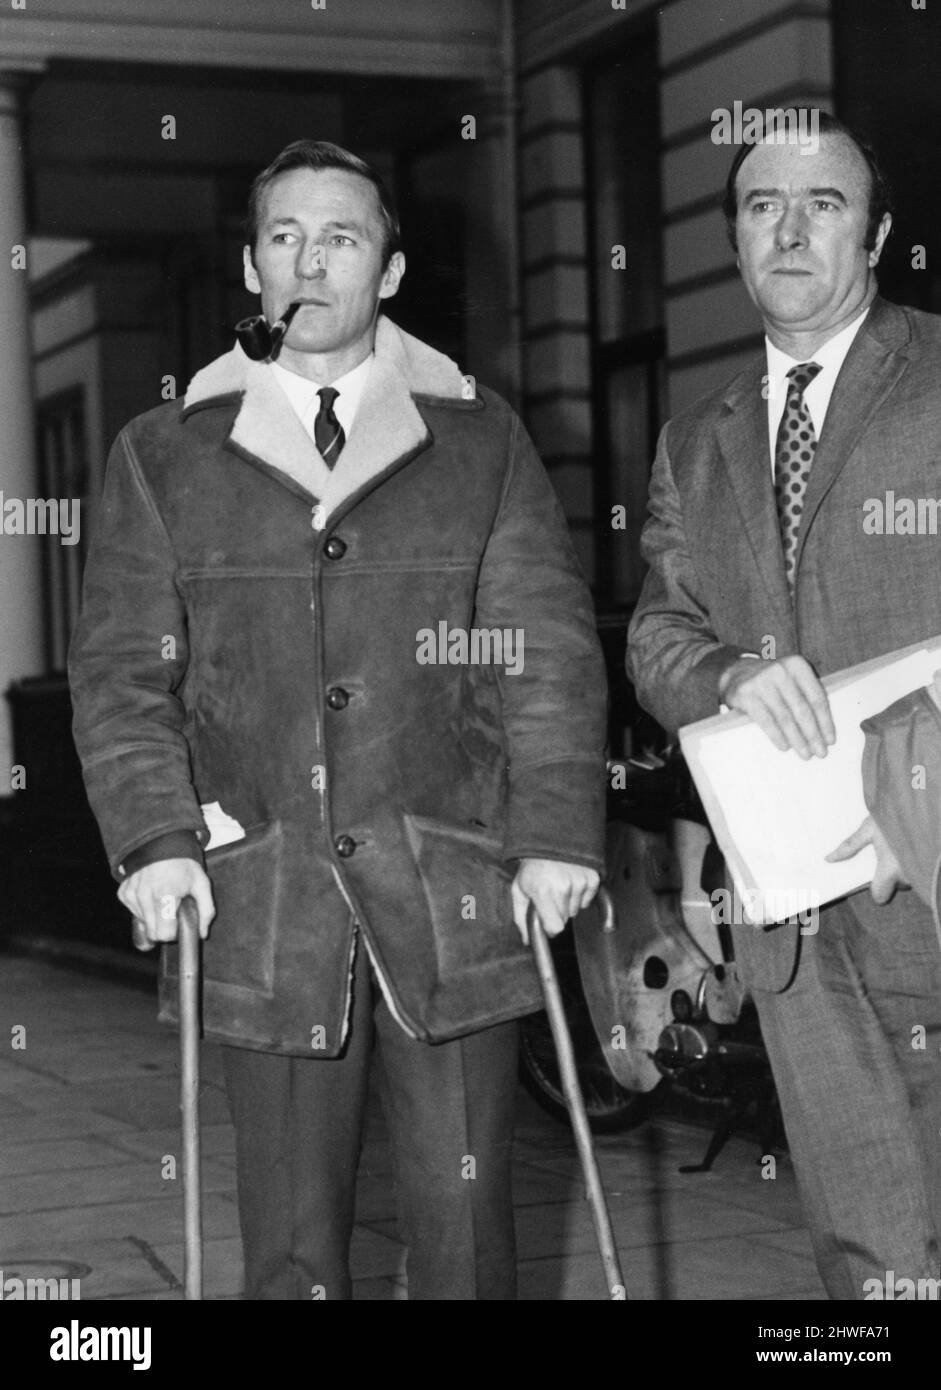 Peter Dobing (left) leaves FA headquarters after a disciplinary hearing with boss Tony Waddington, 16th December 1970.  Dobing on crutches as he had recently broken his leg in a league fixture. *** Local Caption *** Football Player Football Manager Stock Photo